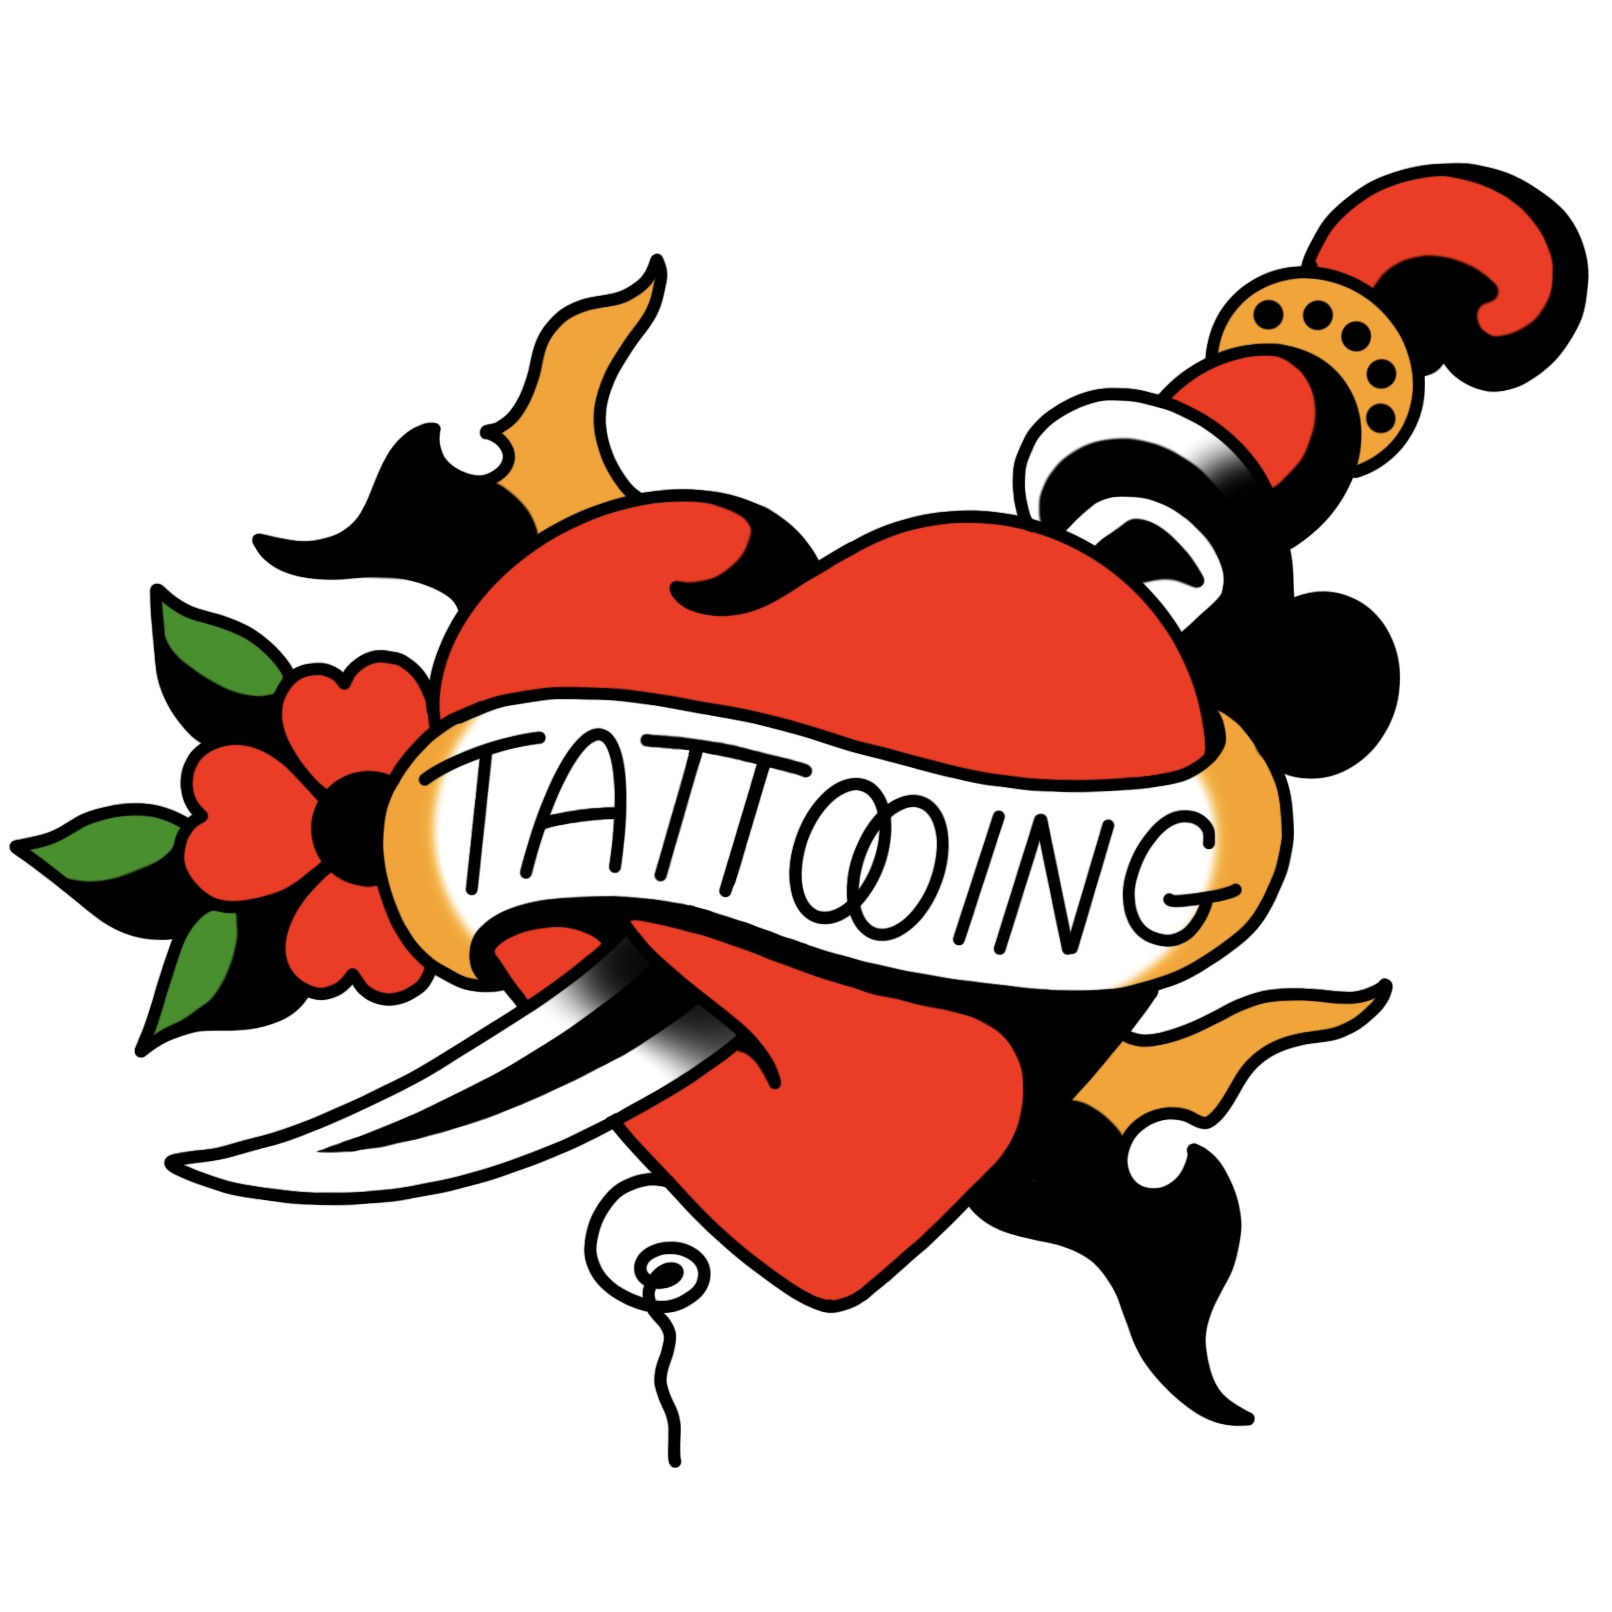 I Love Tattooing Episode 3: Employee V Contractor